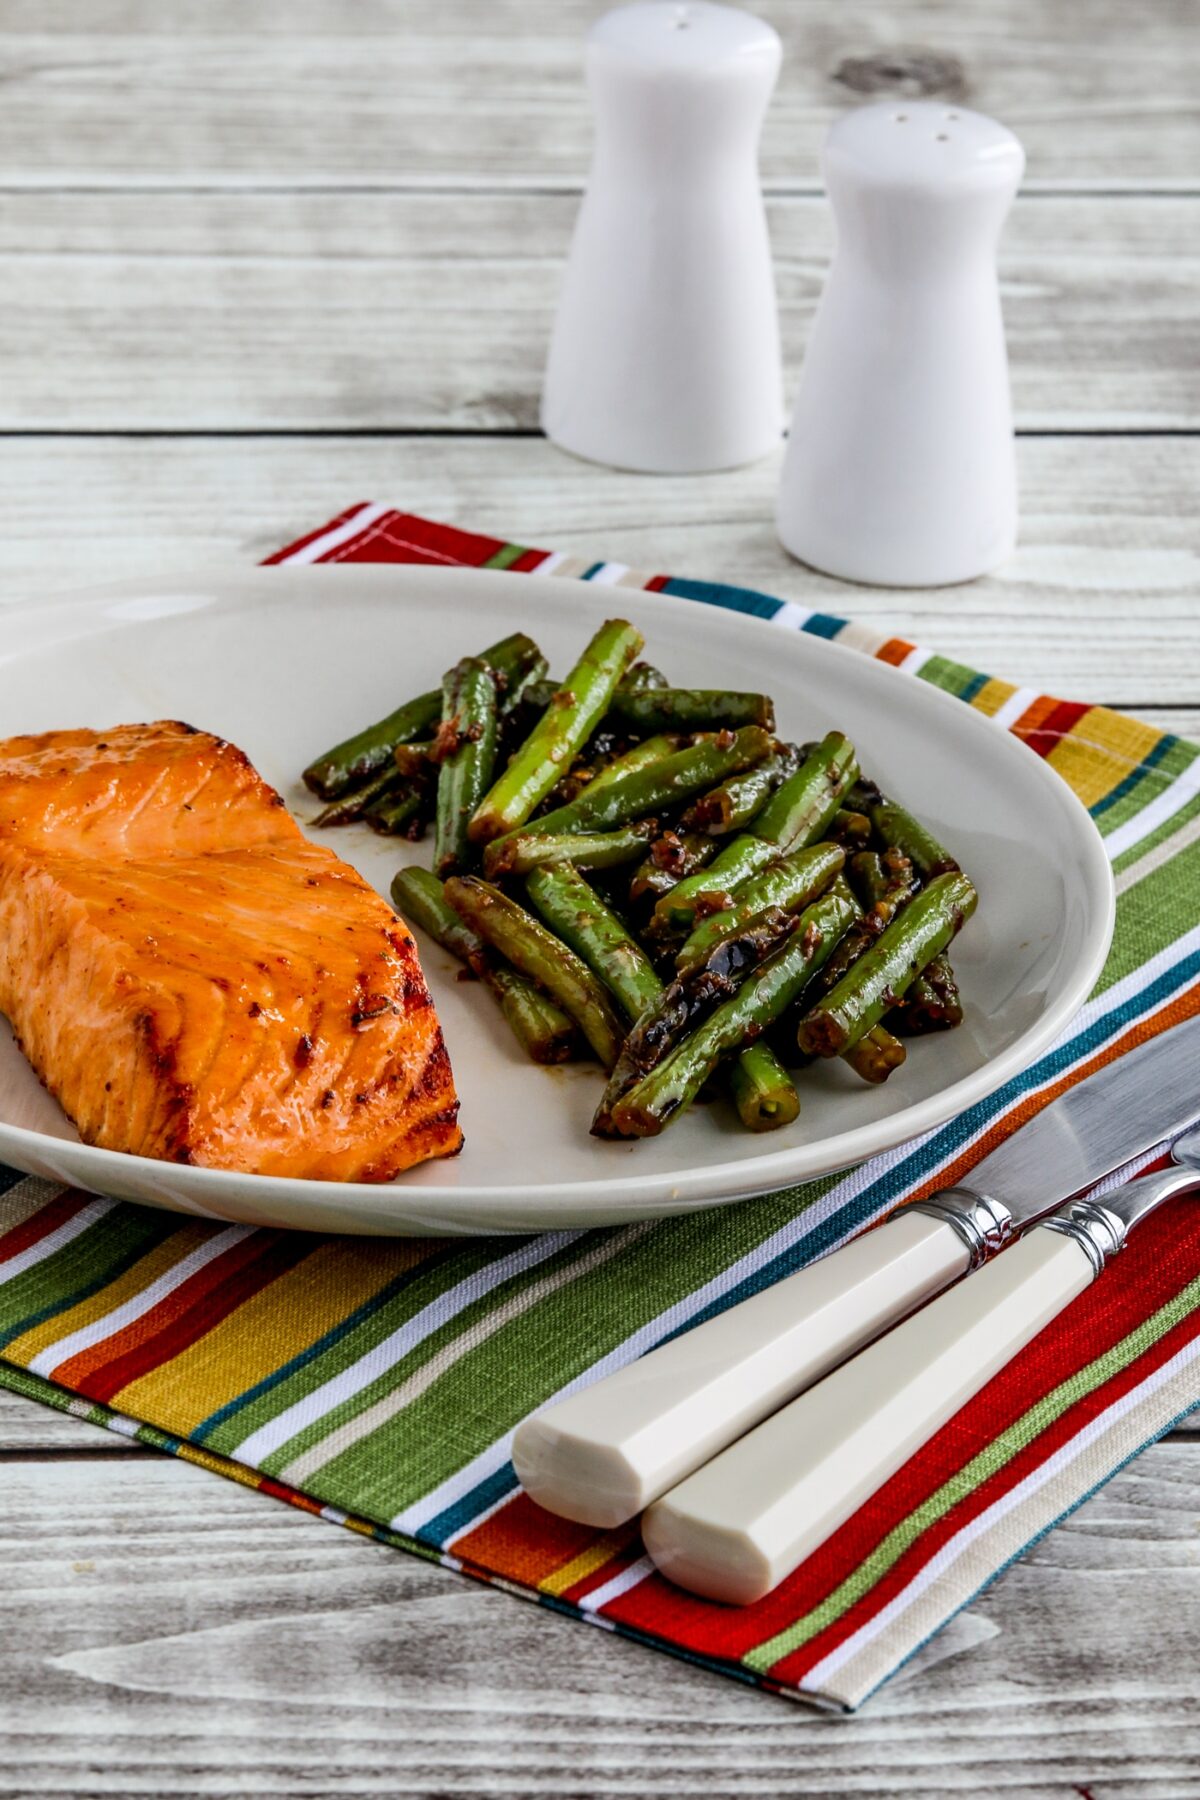 Maple Glazed Salmon shown on serving plate with green beans